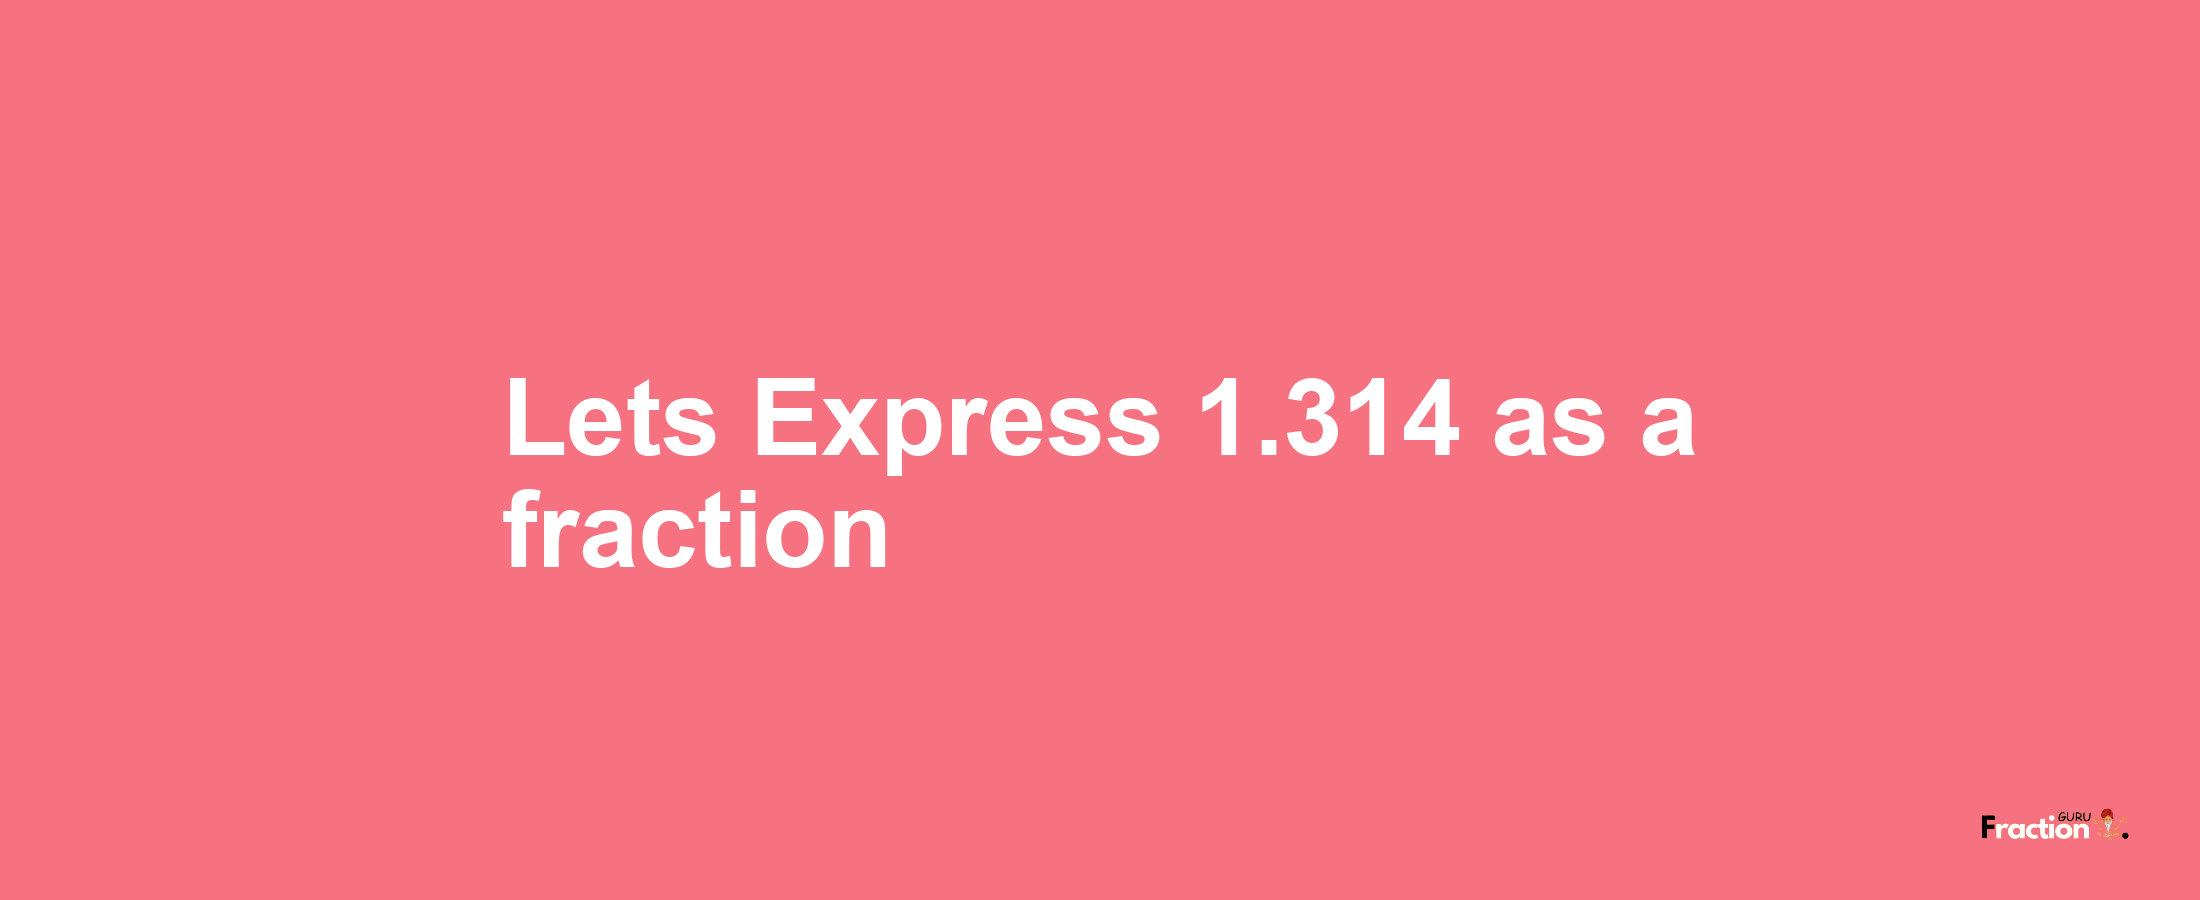 Lets Express 1.314 as afraction